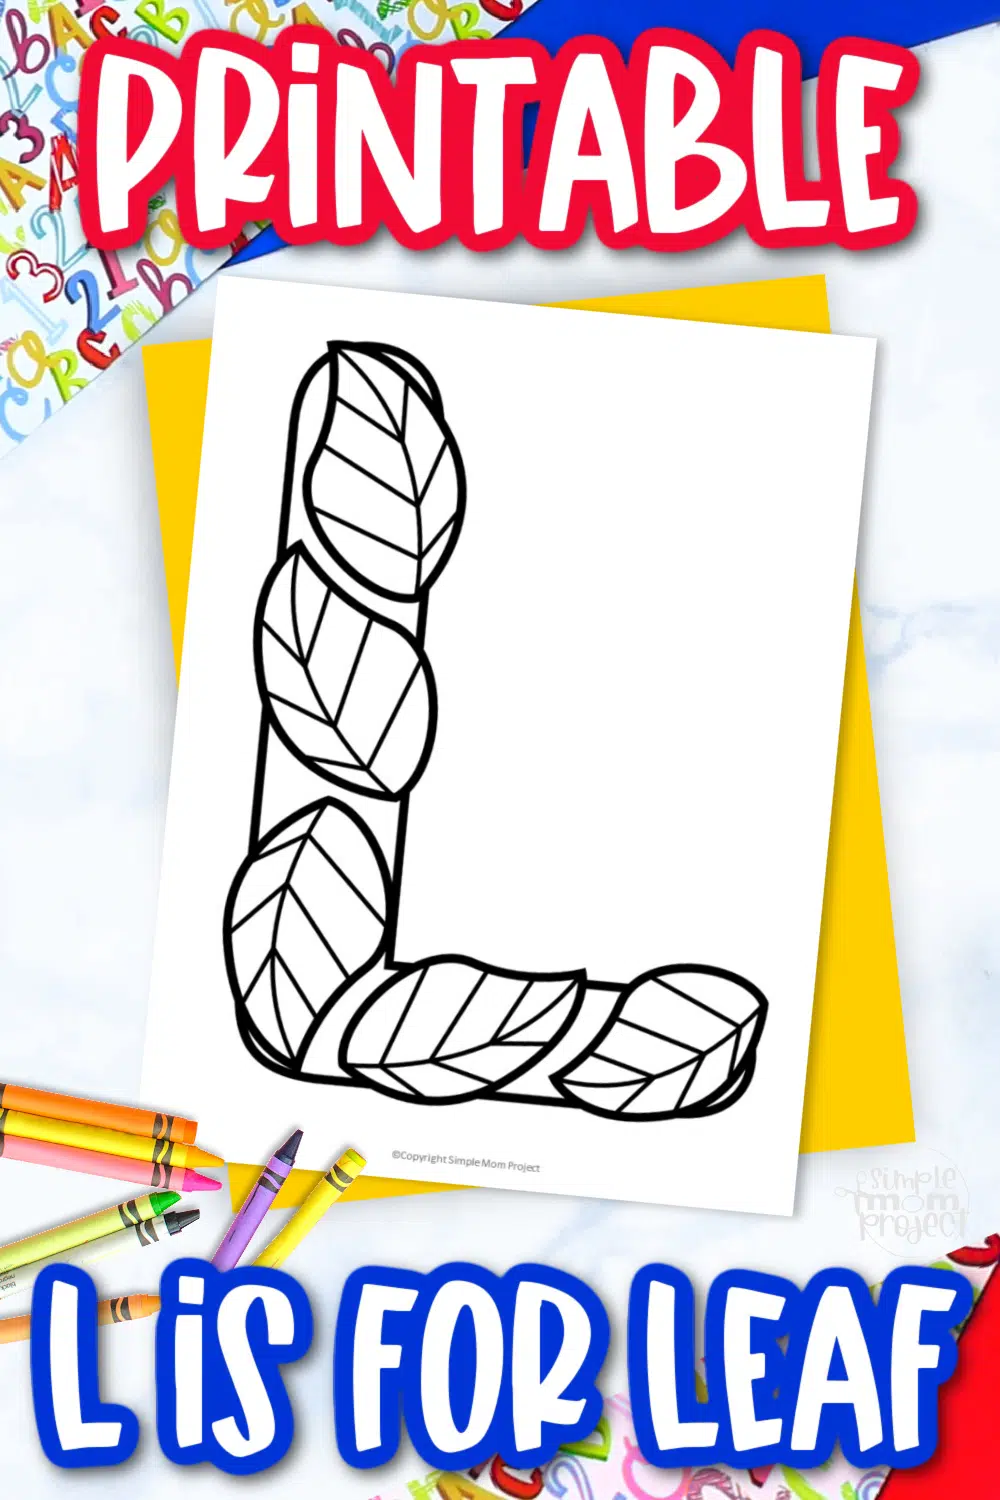 Free printable letter i coloring page â simple mom project